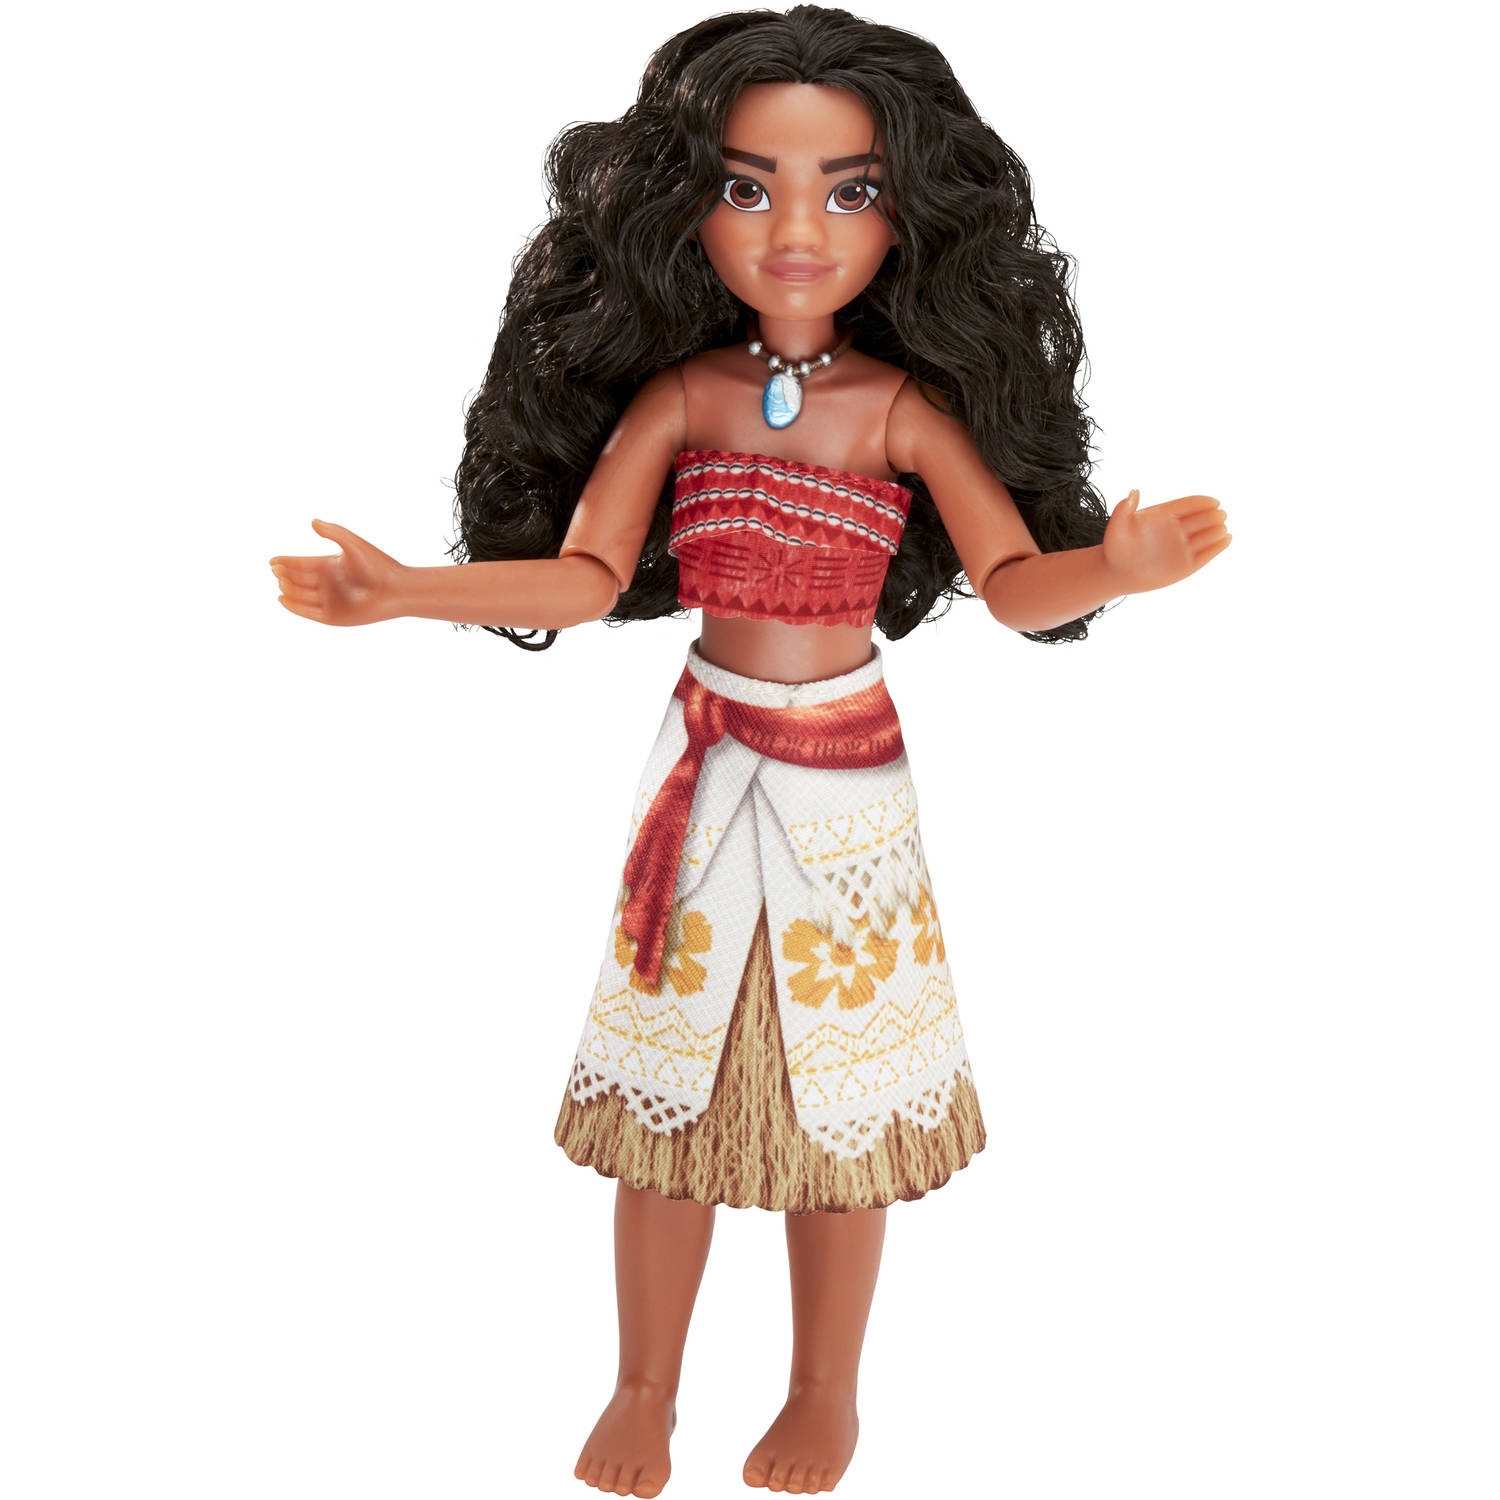 Disney Moana Of Oceania Adventure Figure, Ages 3 And Up - image 3 of 14